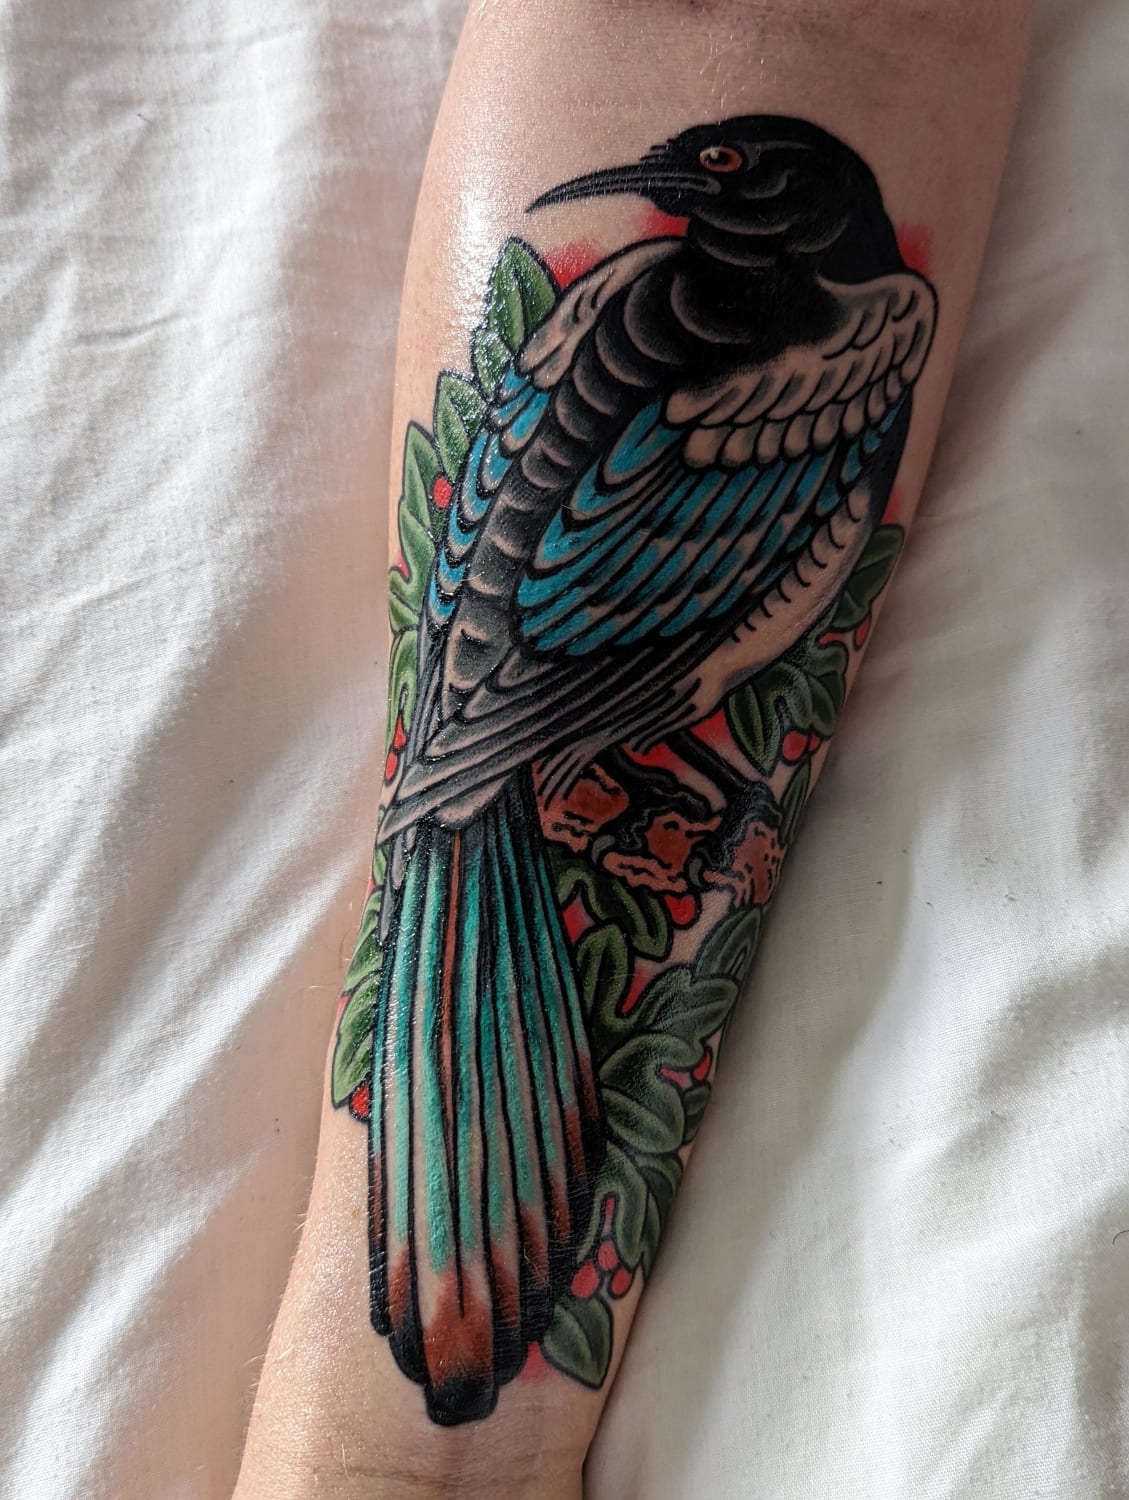 Magpie I got the other day by BradT at Stronghold, Cardiff.